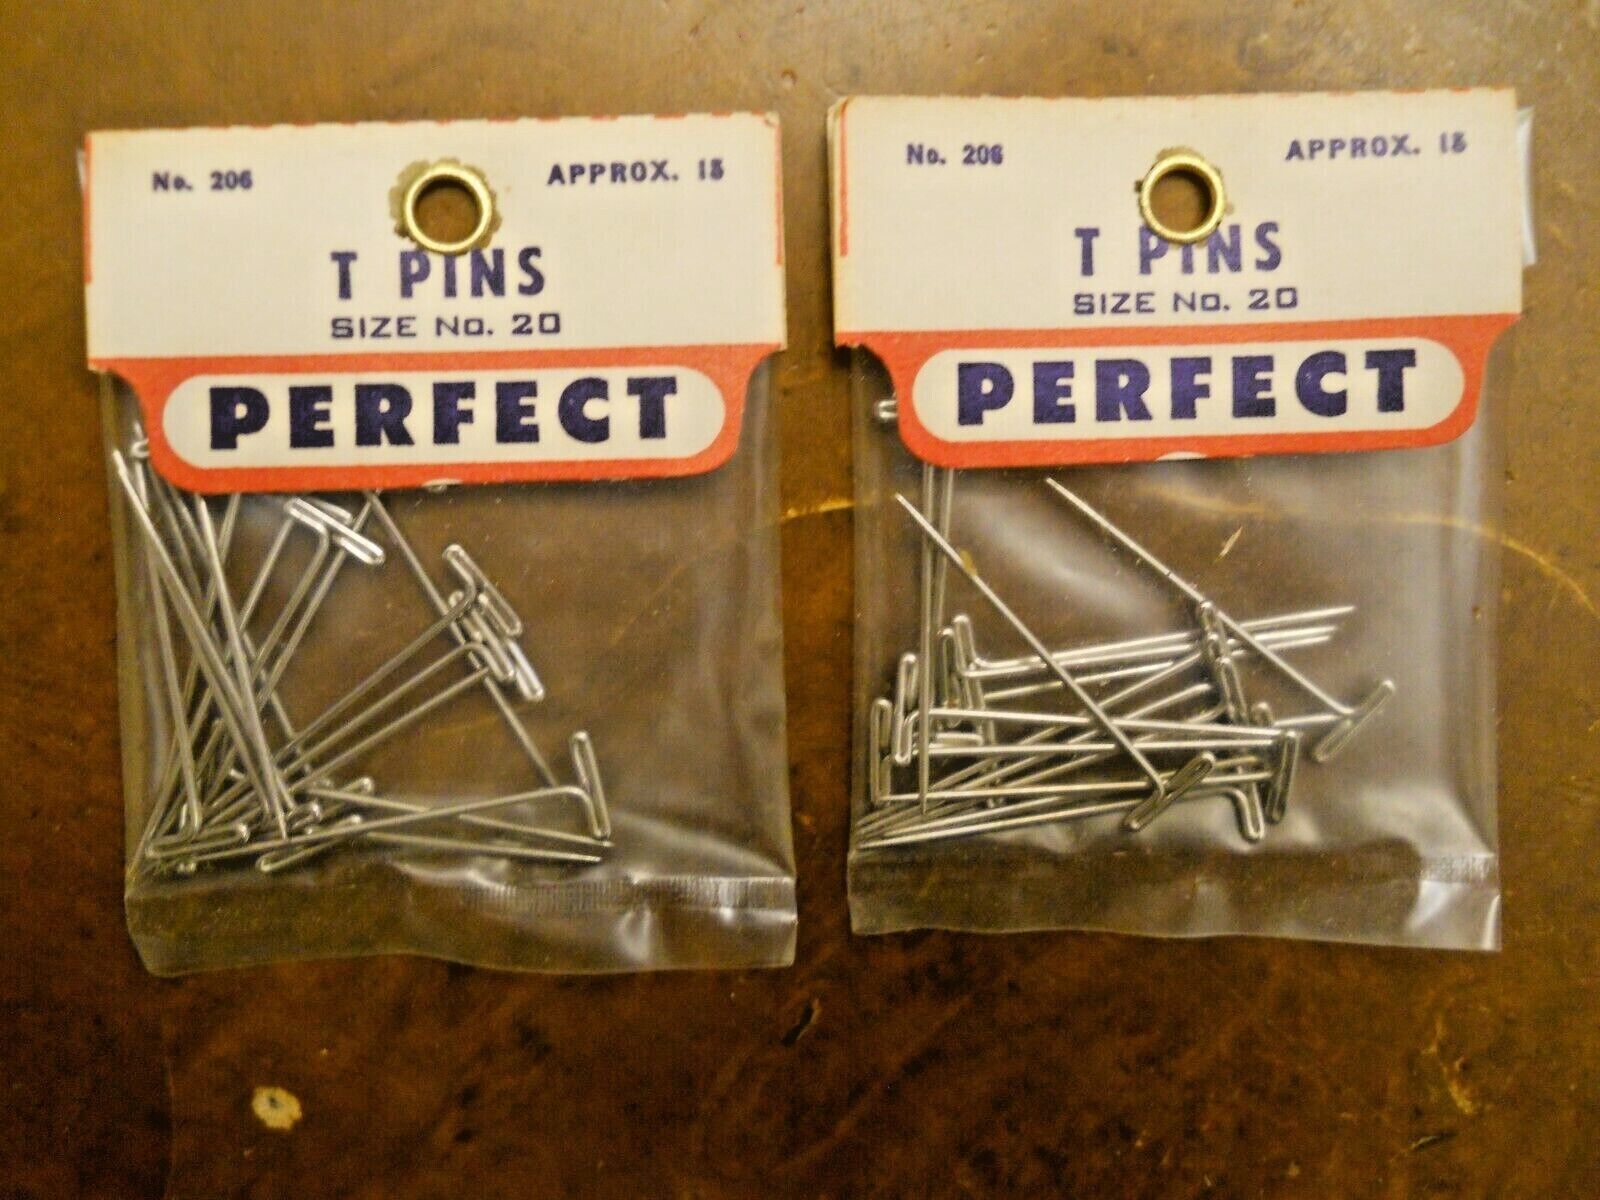 PERFECT #206 T-PINS SIZE 20, 2 PACKAGES (NEW IN SEALED PACKAGE)